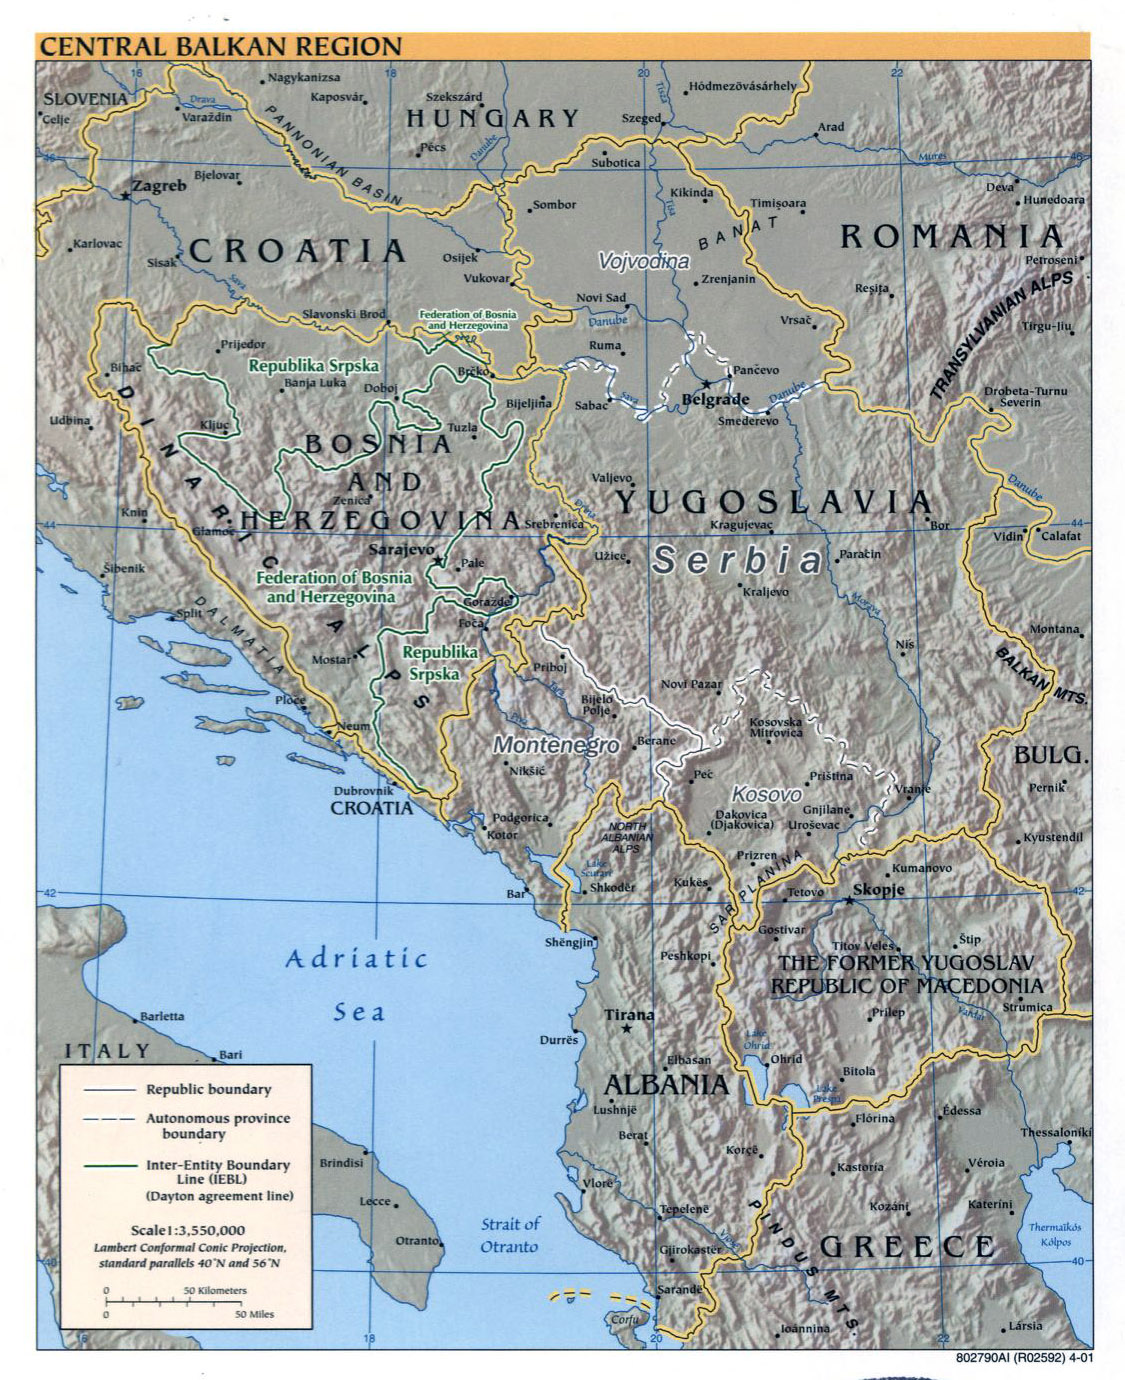 detailed-political-map-of-central-balkan